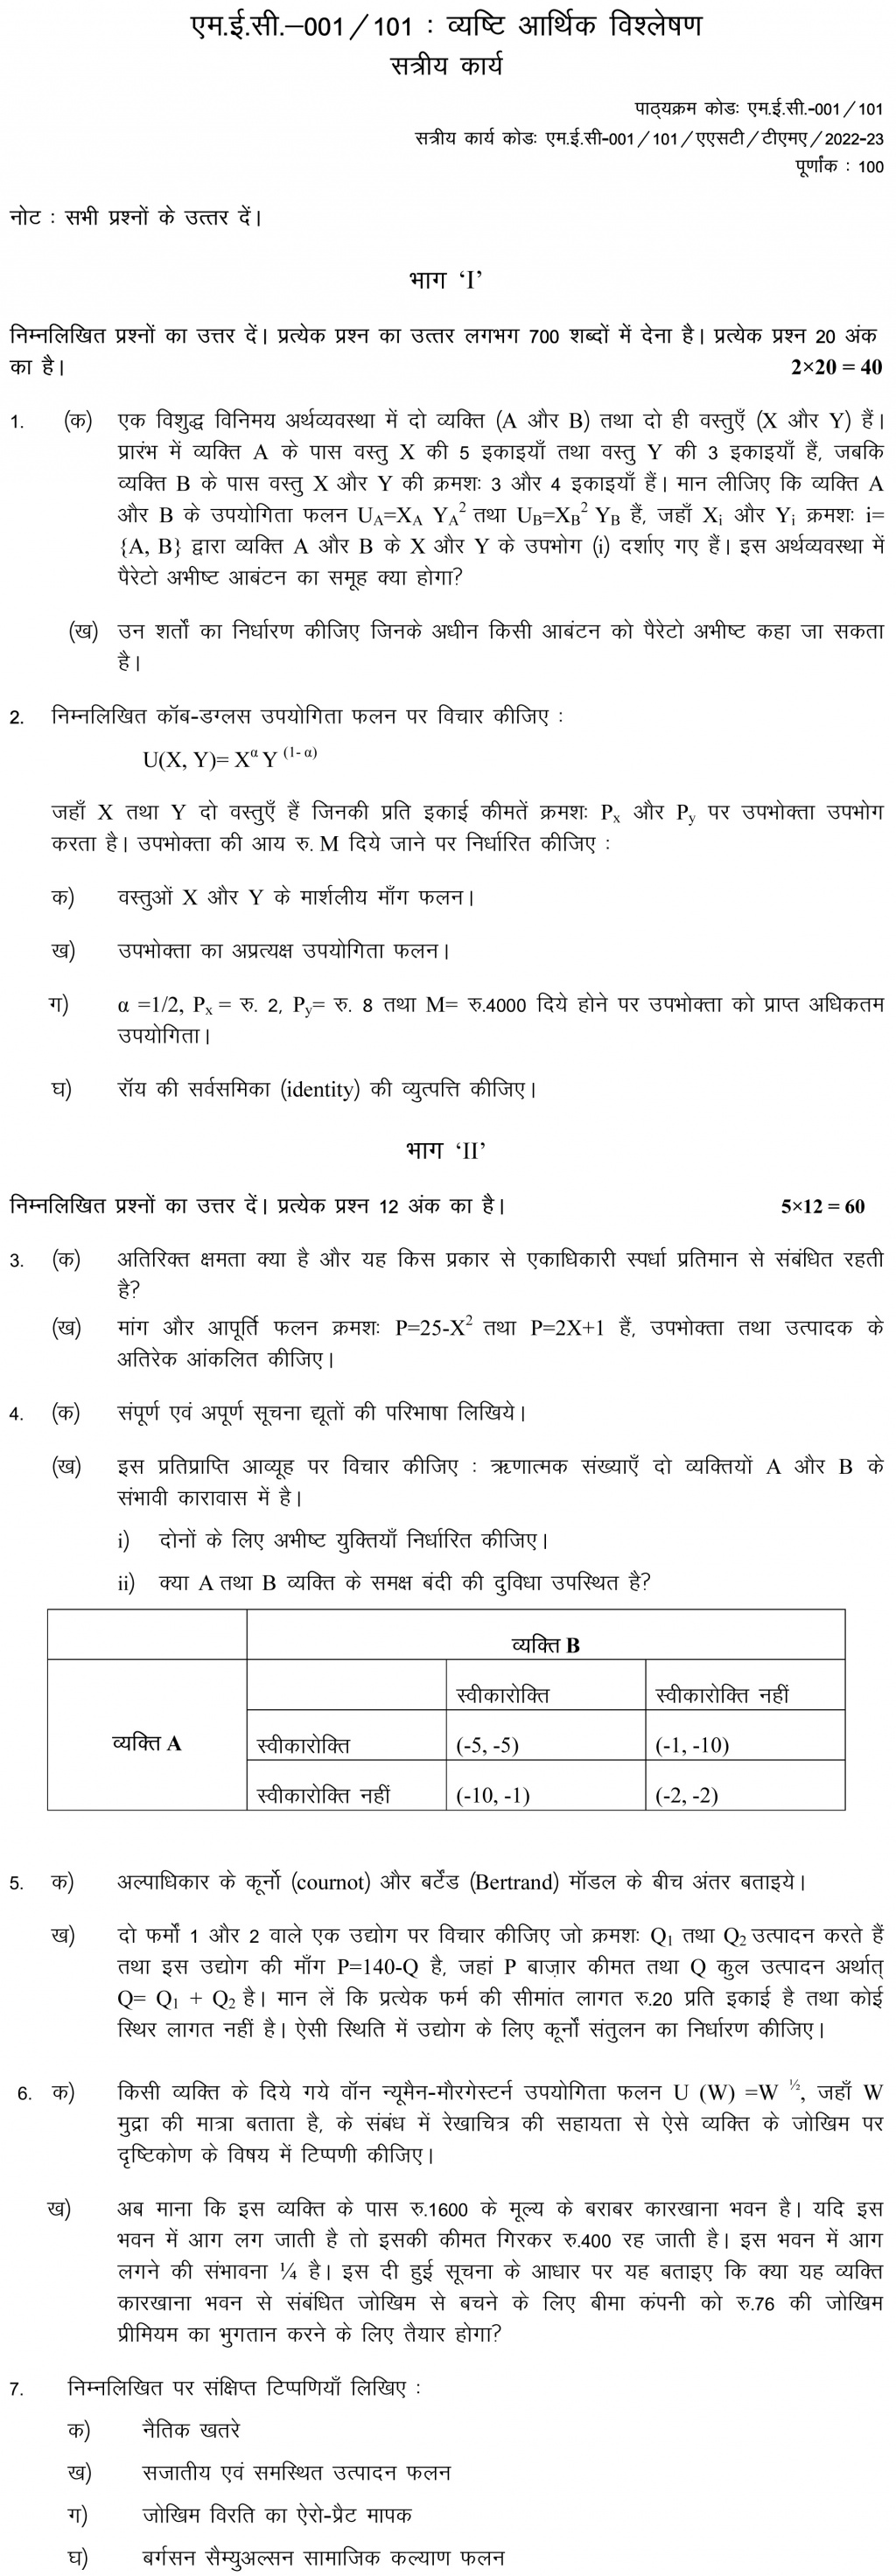 IGNOU MEC-101 - Microeconomic Analysis Latest Solved Assignment-July 2022 – January 2023